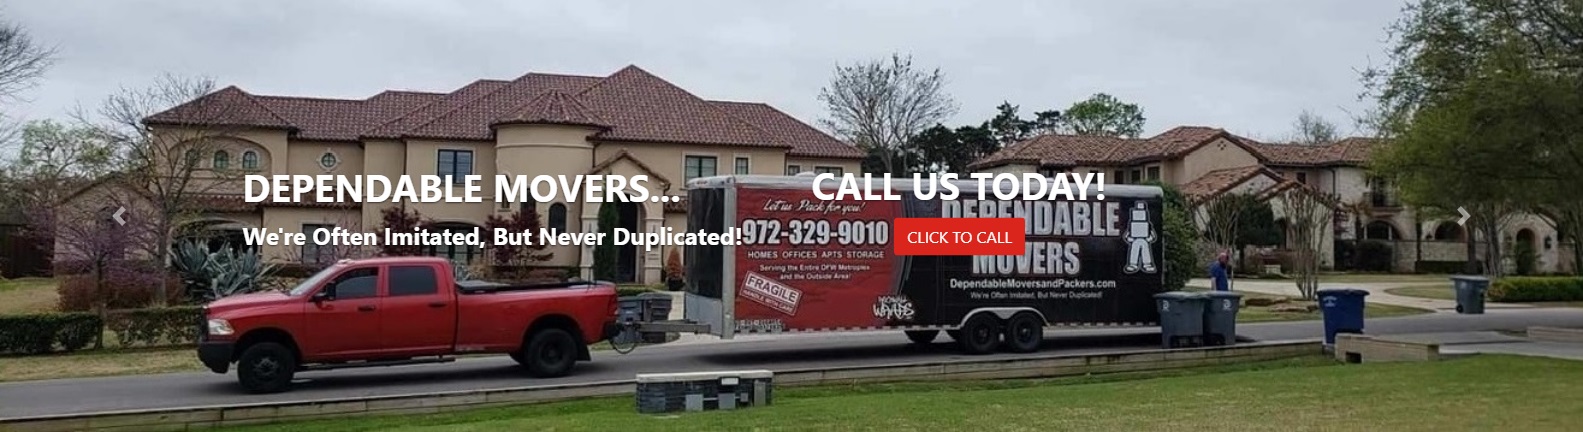 Dependable Movers in the Rockwall Texas area - Home Office Apartment Movers Residential Commercial Movers in the Rockwall Texas area